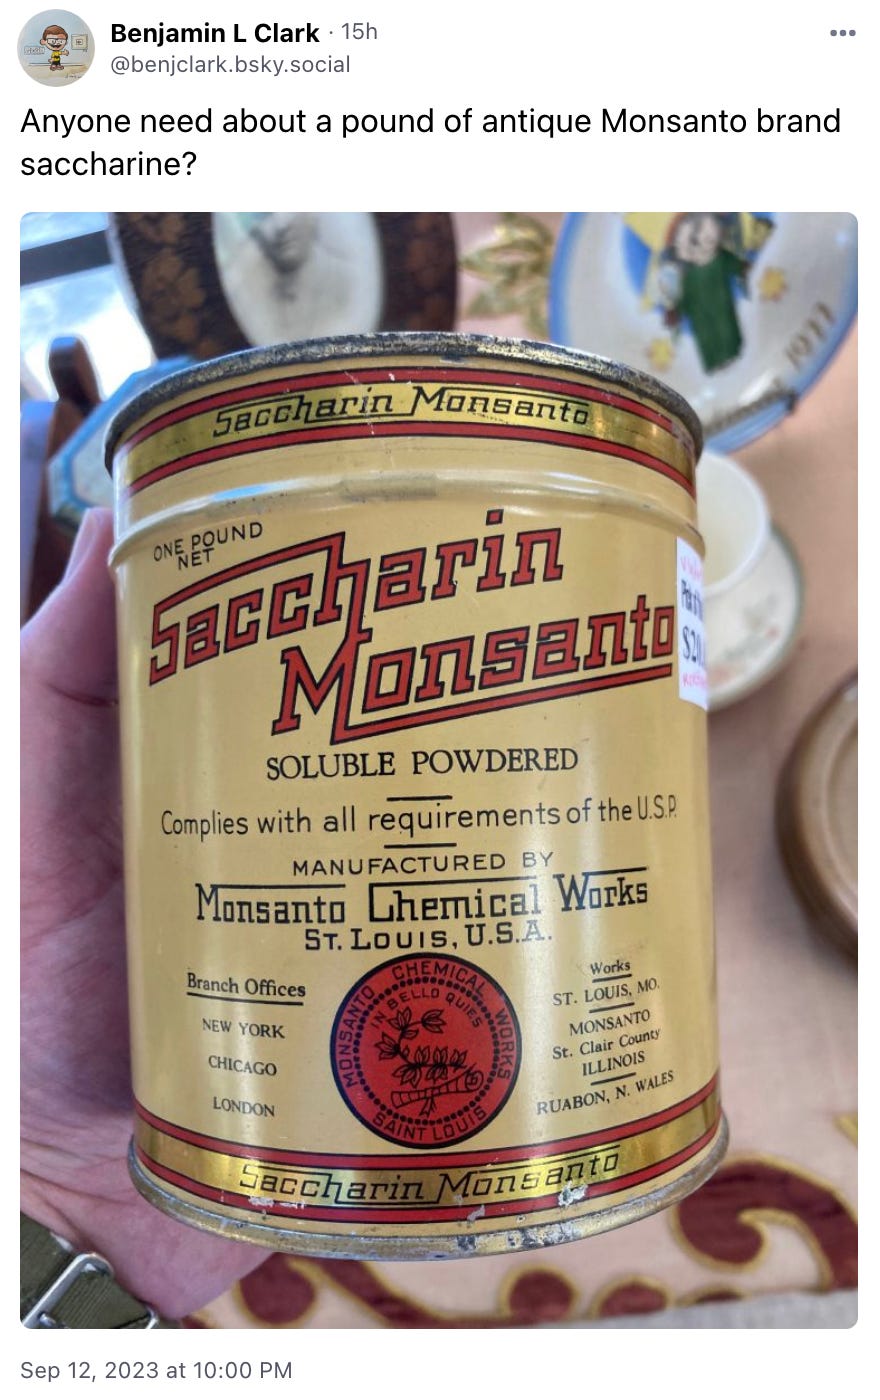 Anyone need about a pound of antique Monsanto brand saccharine?